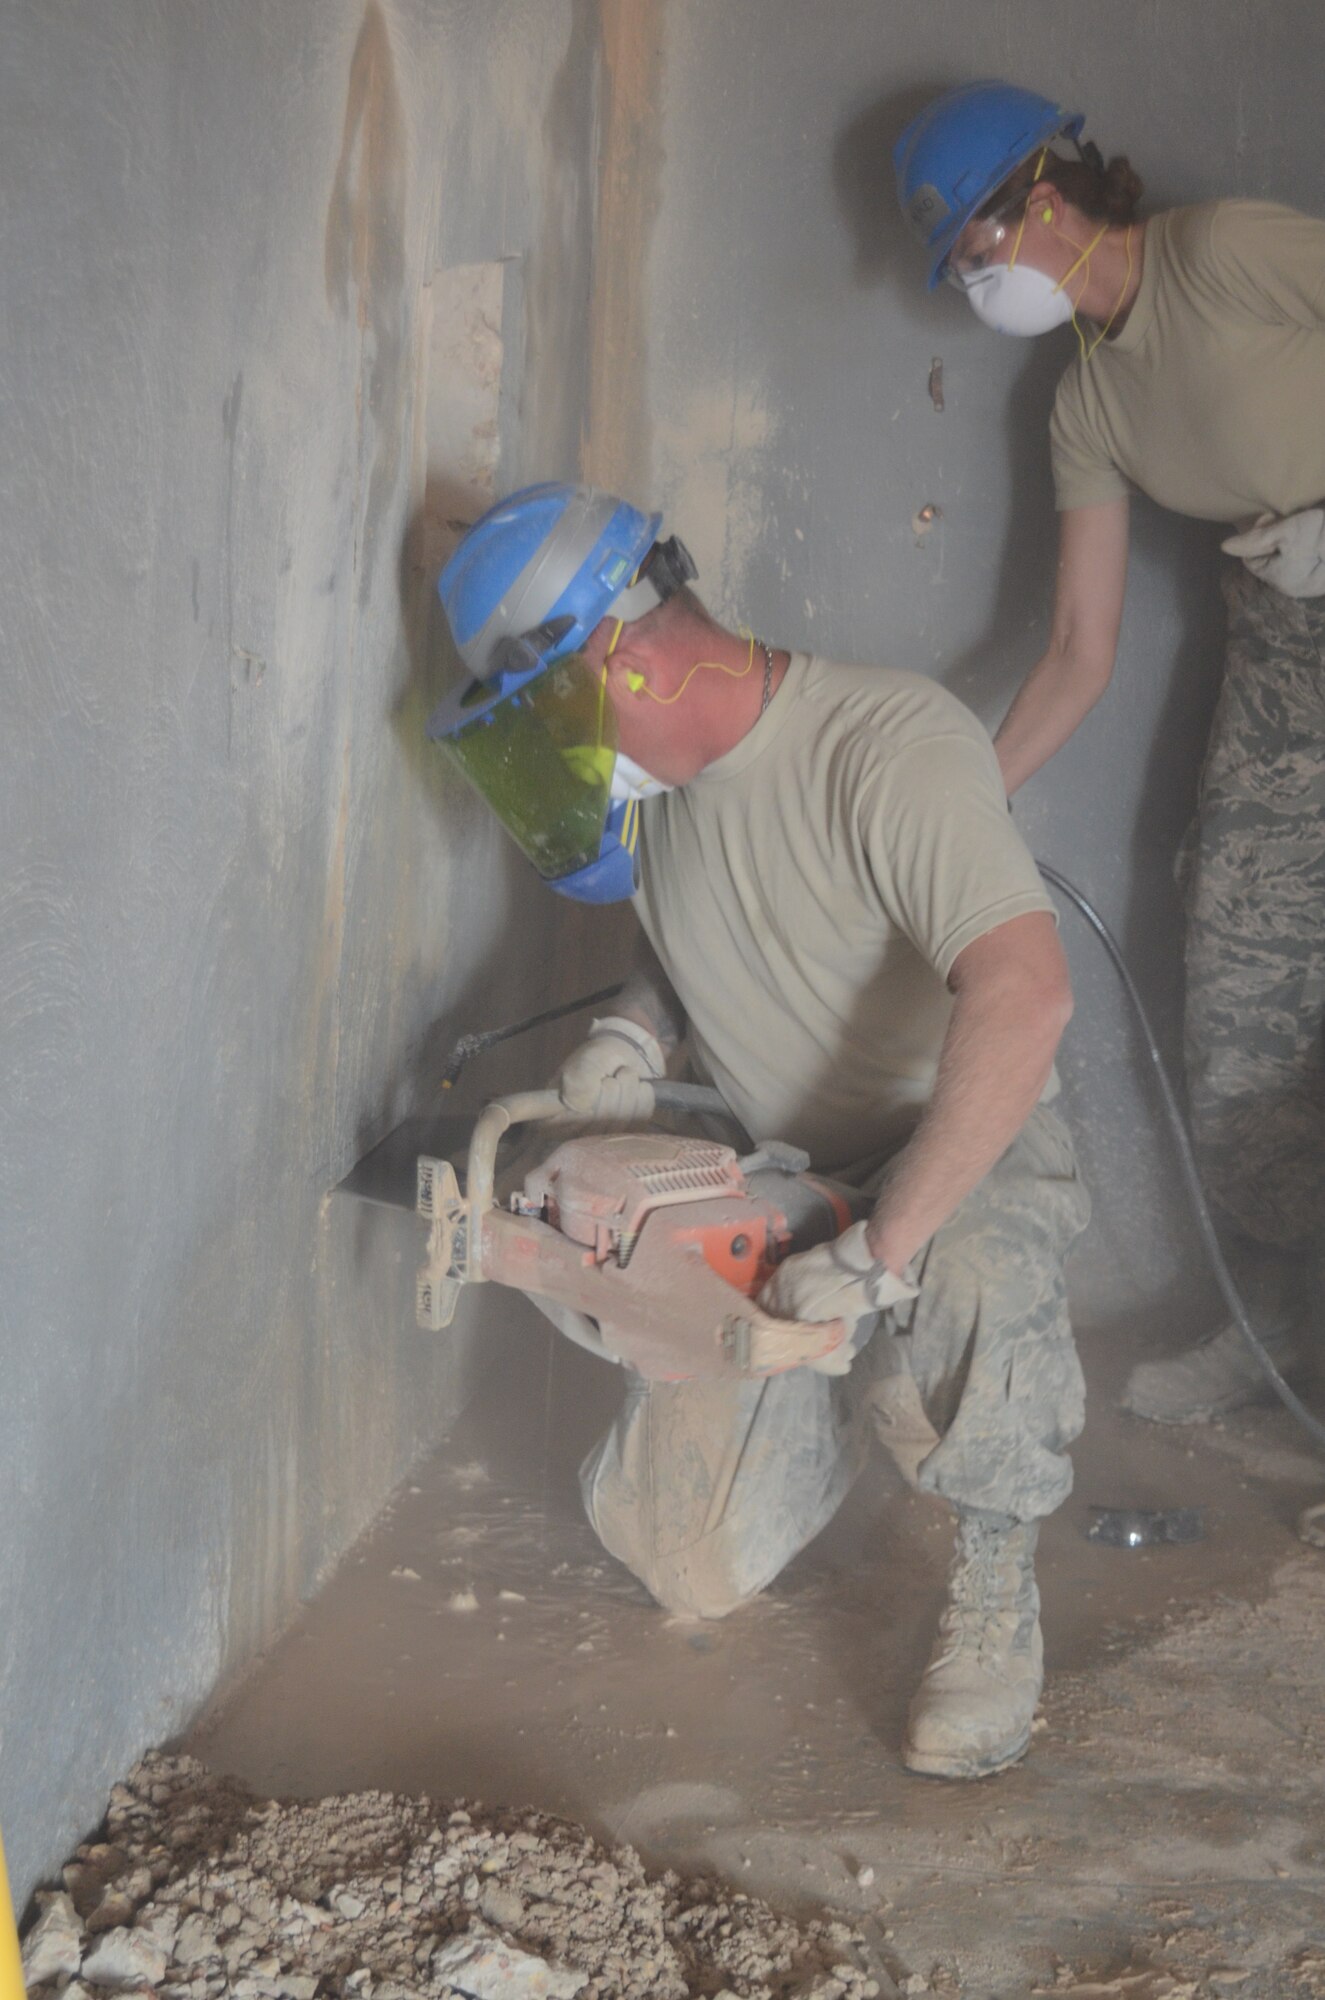 Master Sgt. Randy Frantz, a native of Troy Ill. and a member of 126th Civil Engineer Squadron attached to the 126th Air Refueling Wing, cuts a hole in a concrete wall to make a door way, while Capt. Allyson Benko, a native of Fairview Heights, also a member of the 126th Civil Engineer Squadron, sprays water on it to keep down the dust at Holt Naval Communication Station, Western Australia Aug. 28, 2013. The new door way is part of Operation C-Band Radar And Pedestal NCS NE Holt- Western Australia. (Air National Guard photo by Airman 1st Class Elise Stout)